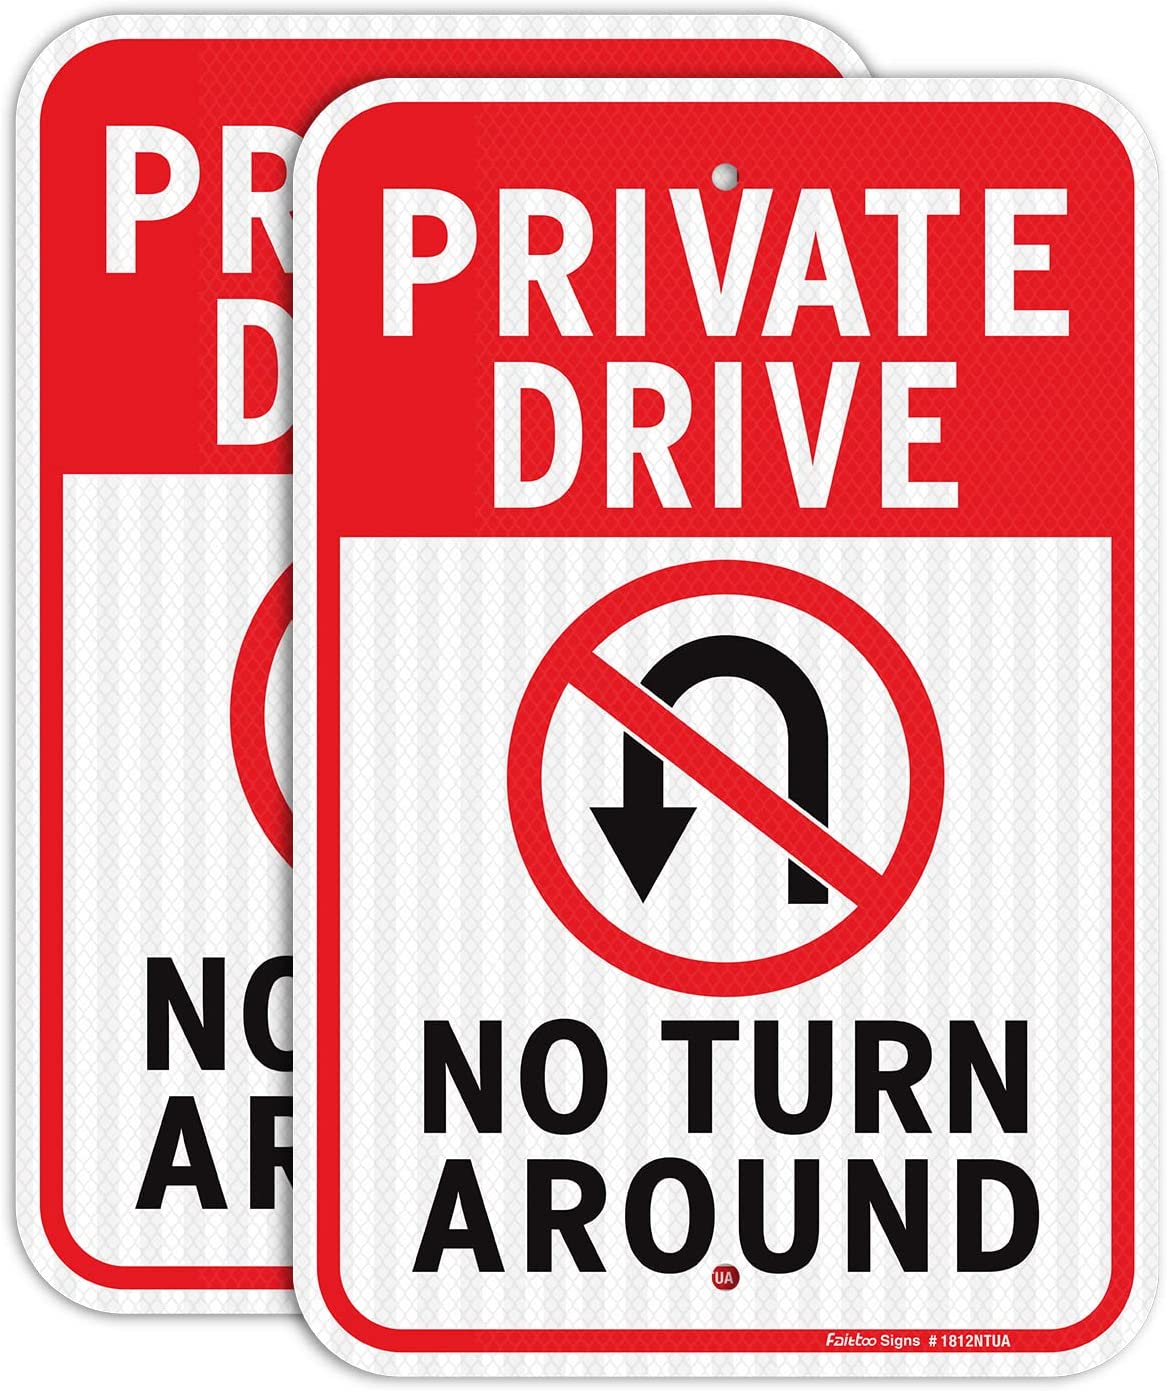 Faittoo Private Drive No Turn Around Sign, 18 x 12 Inches Engineer Grade Reflective Sheeting Rust Free Aluminum, UV Protected, Weather/Fade Resistant, Easy to Install and Read, Indoor/ Outdoors Use